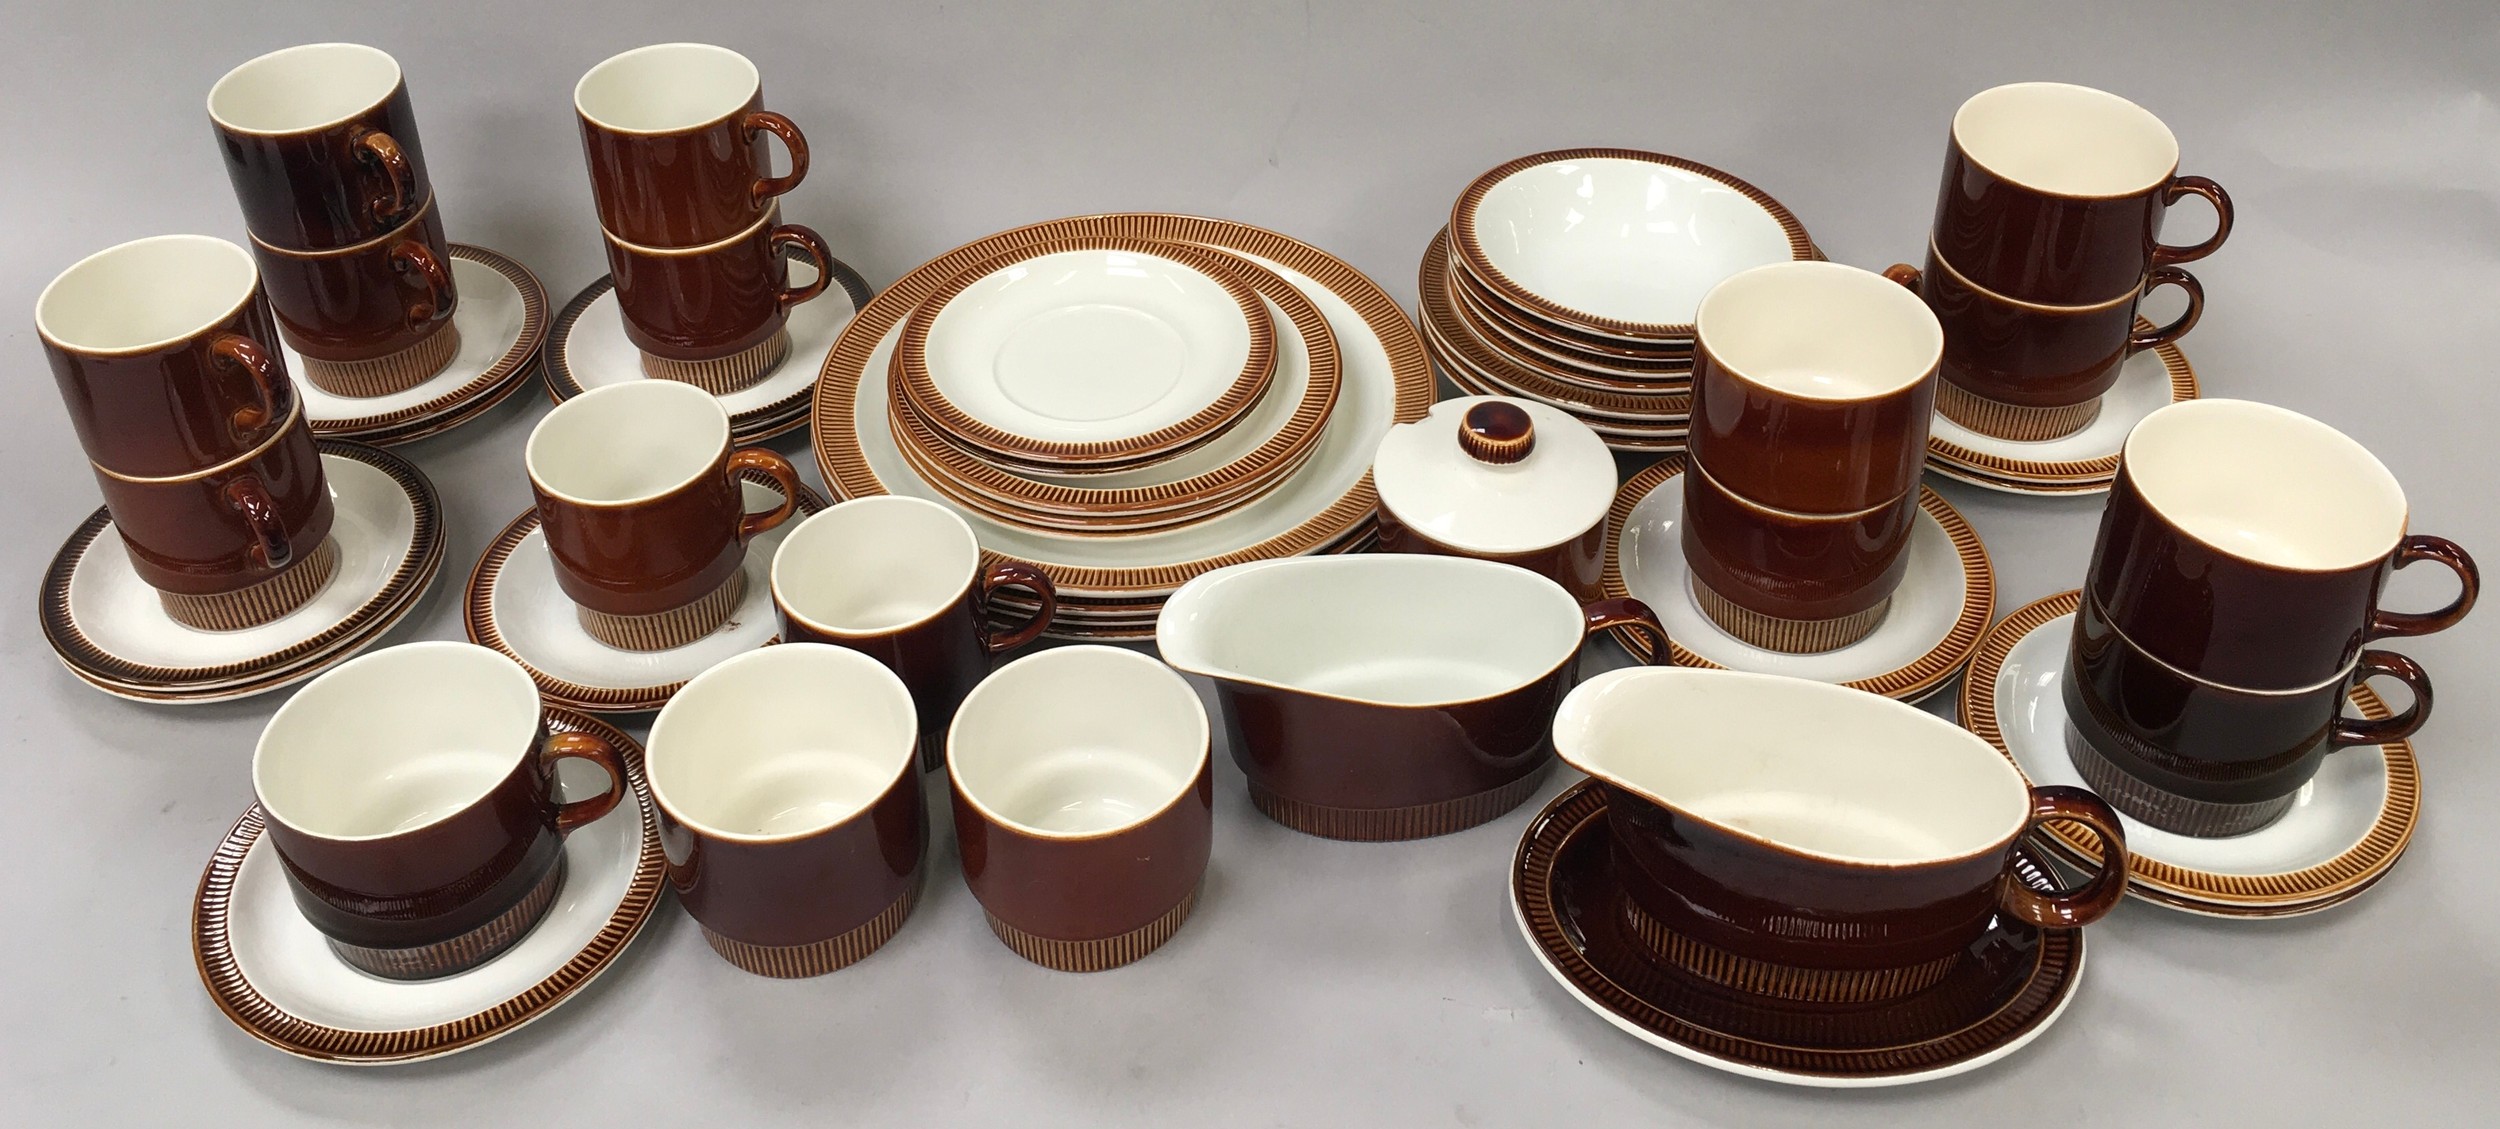 Poole pottery collection of ?Chestnut Brown? dinnerware approx 50 pieces.